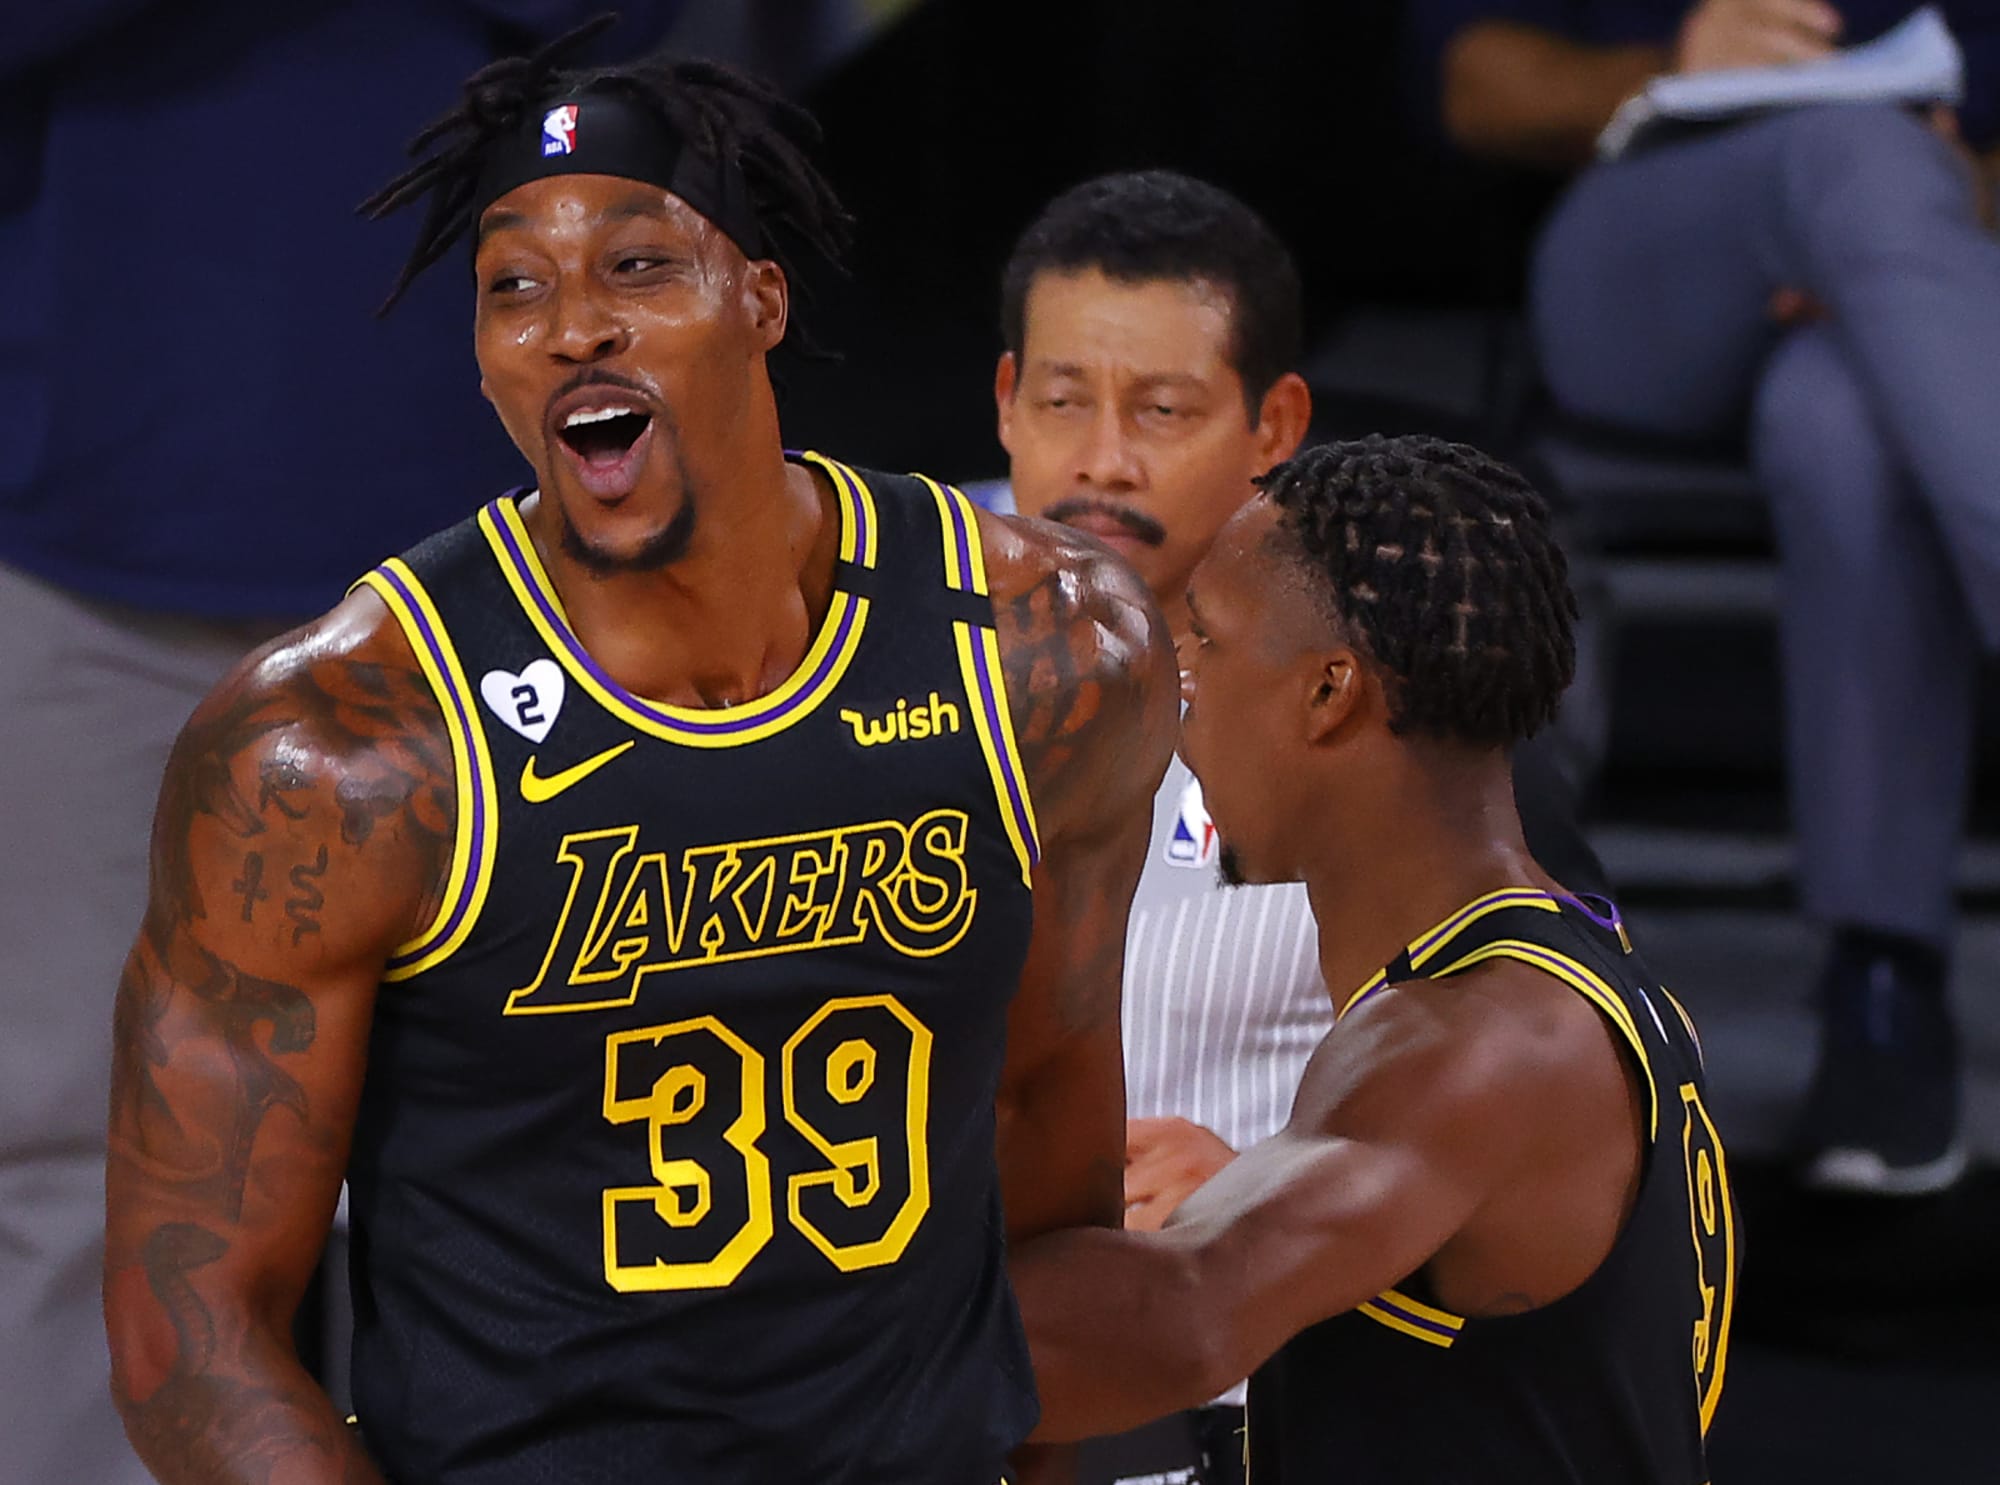 Even Dwight Howard wonders why Warriors might sign Dwight Howard